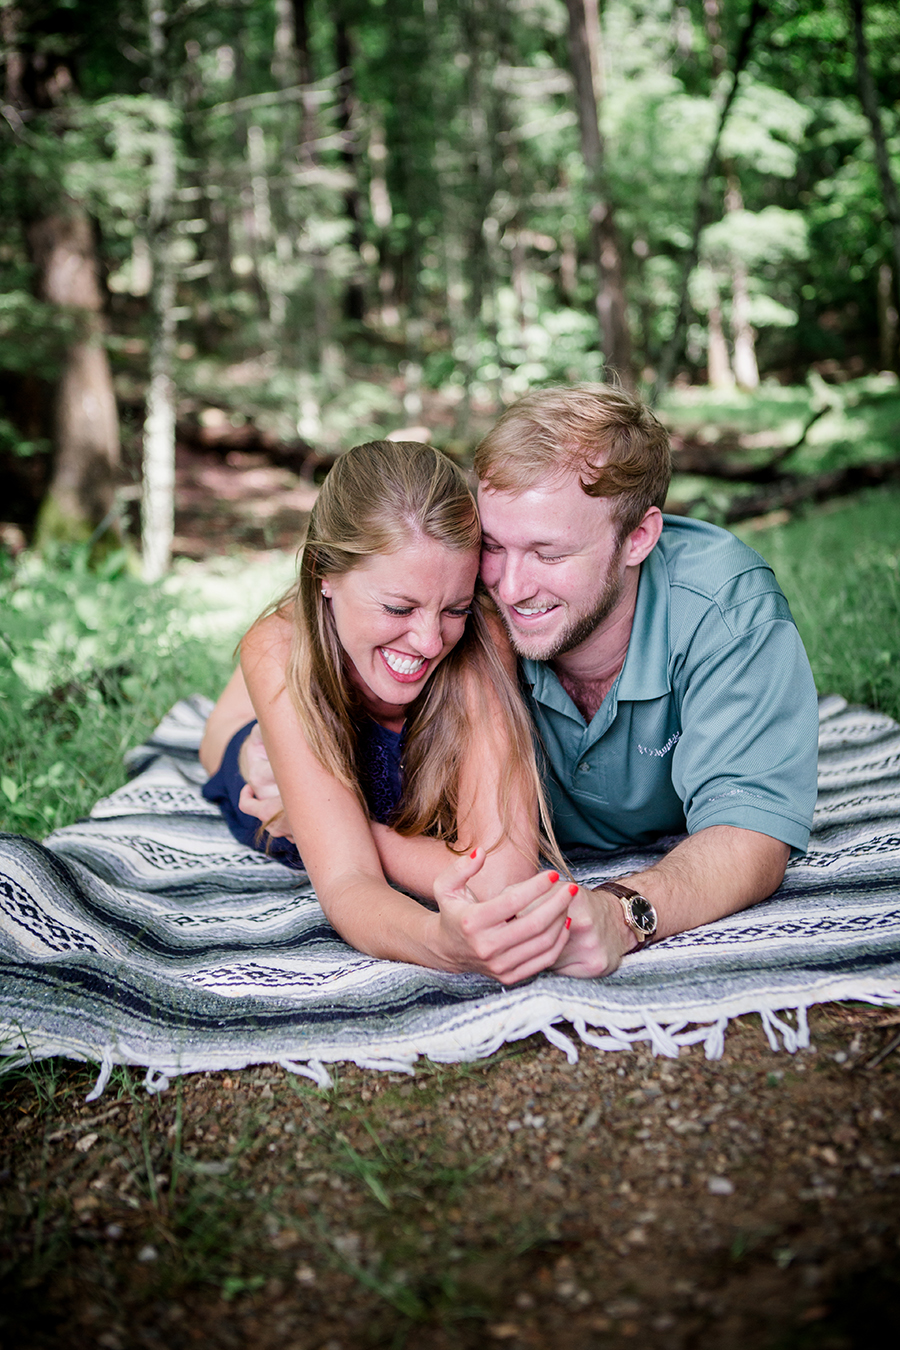 On stomachs tickling her engagement photo by Knoxville Wedding Photographer, Amanda May Photos.